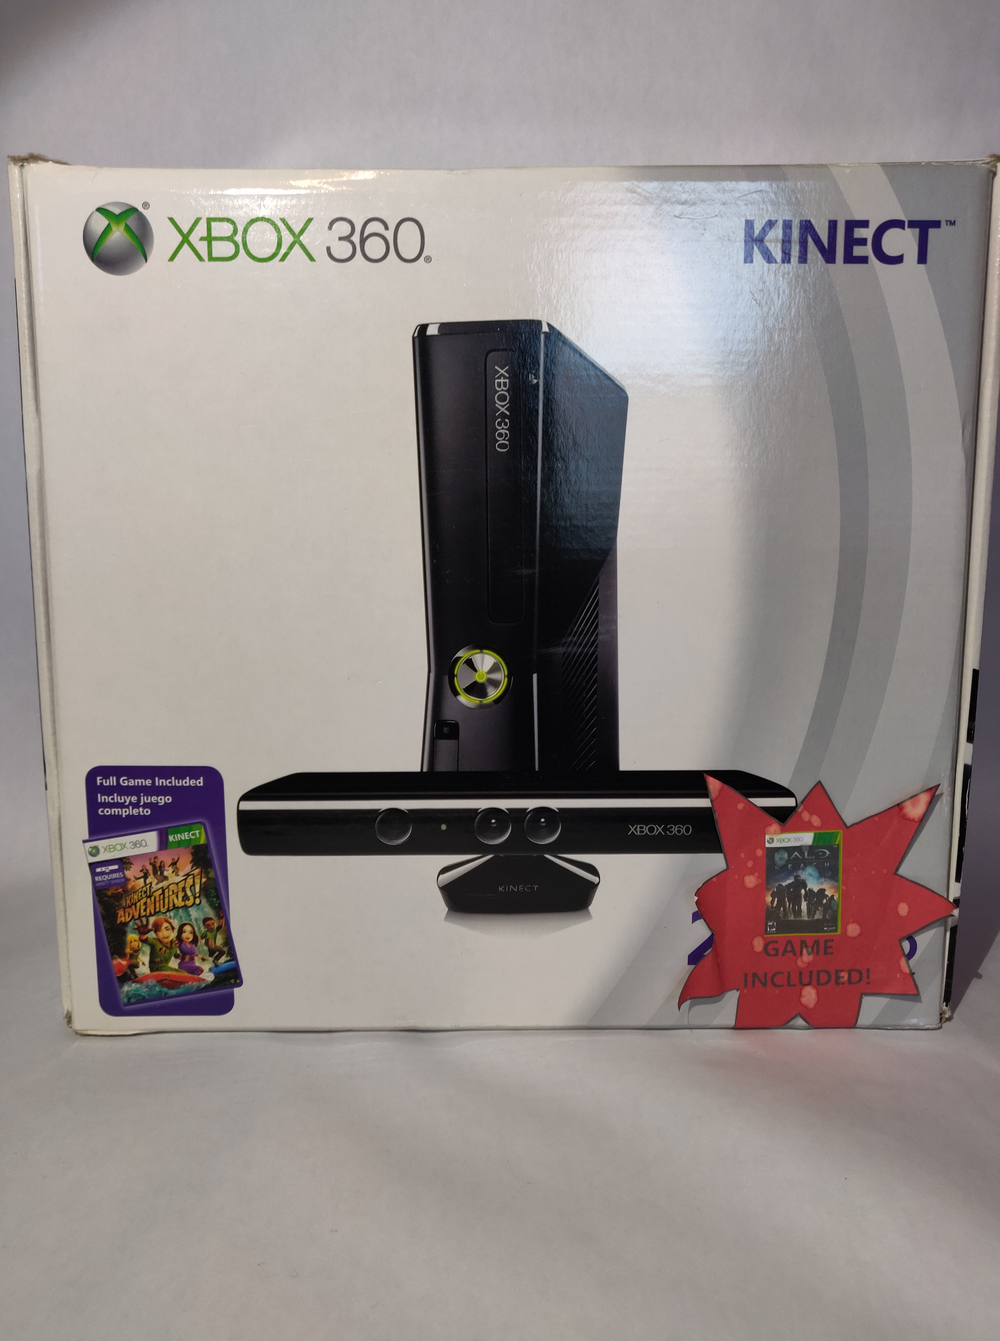 Xbox 360 with kinect (Halo reach included)